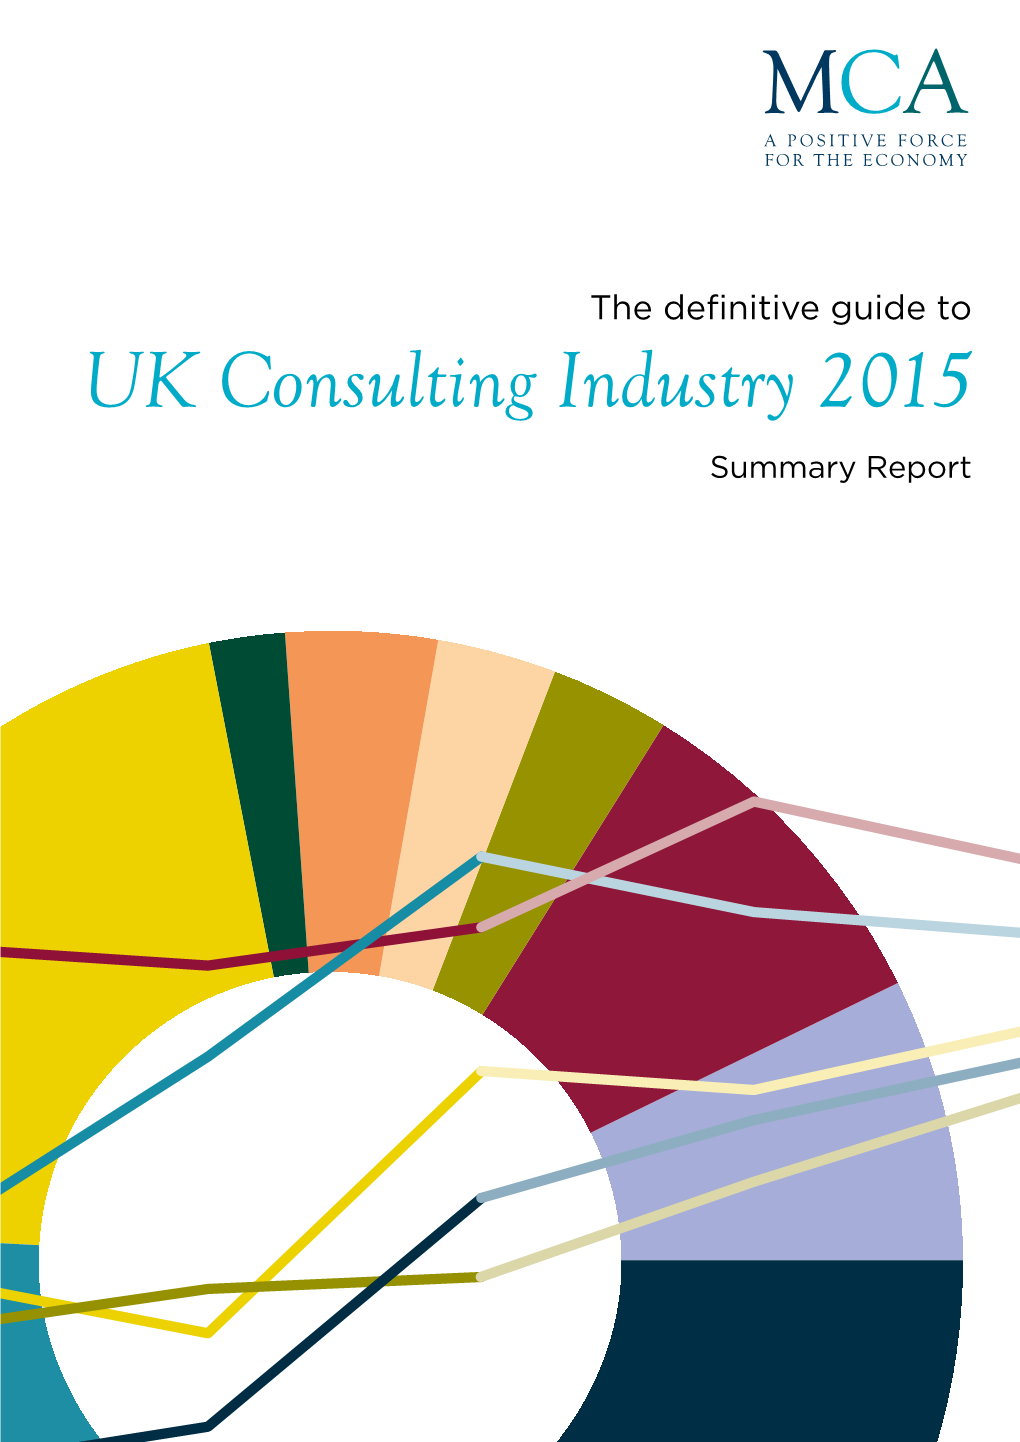 UK Consulting Industry 2015 Summary Report 2 | UK Consulting Industry 2015